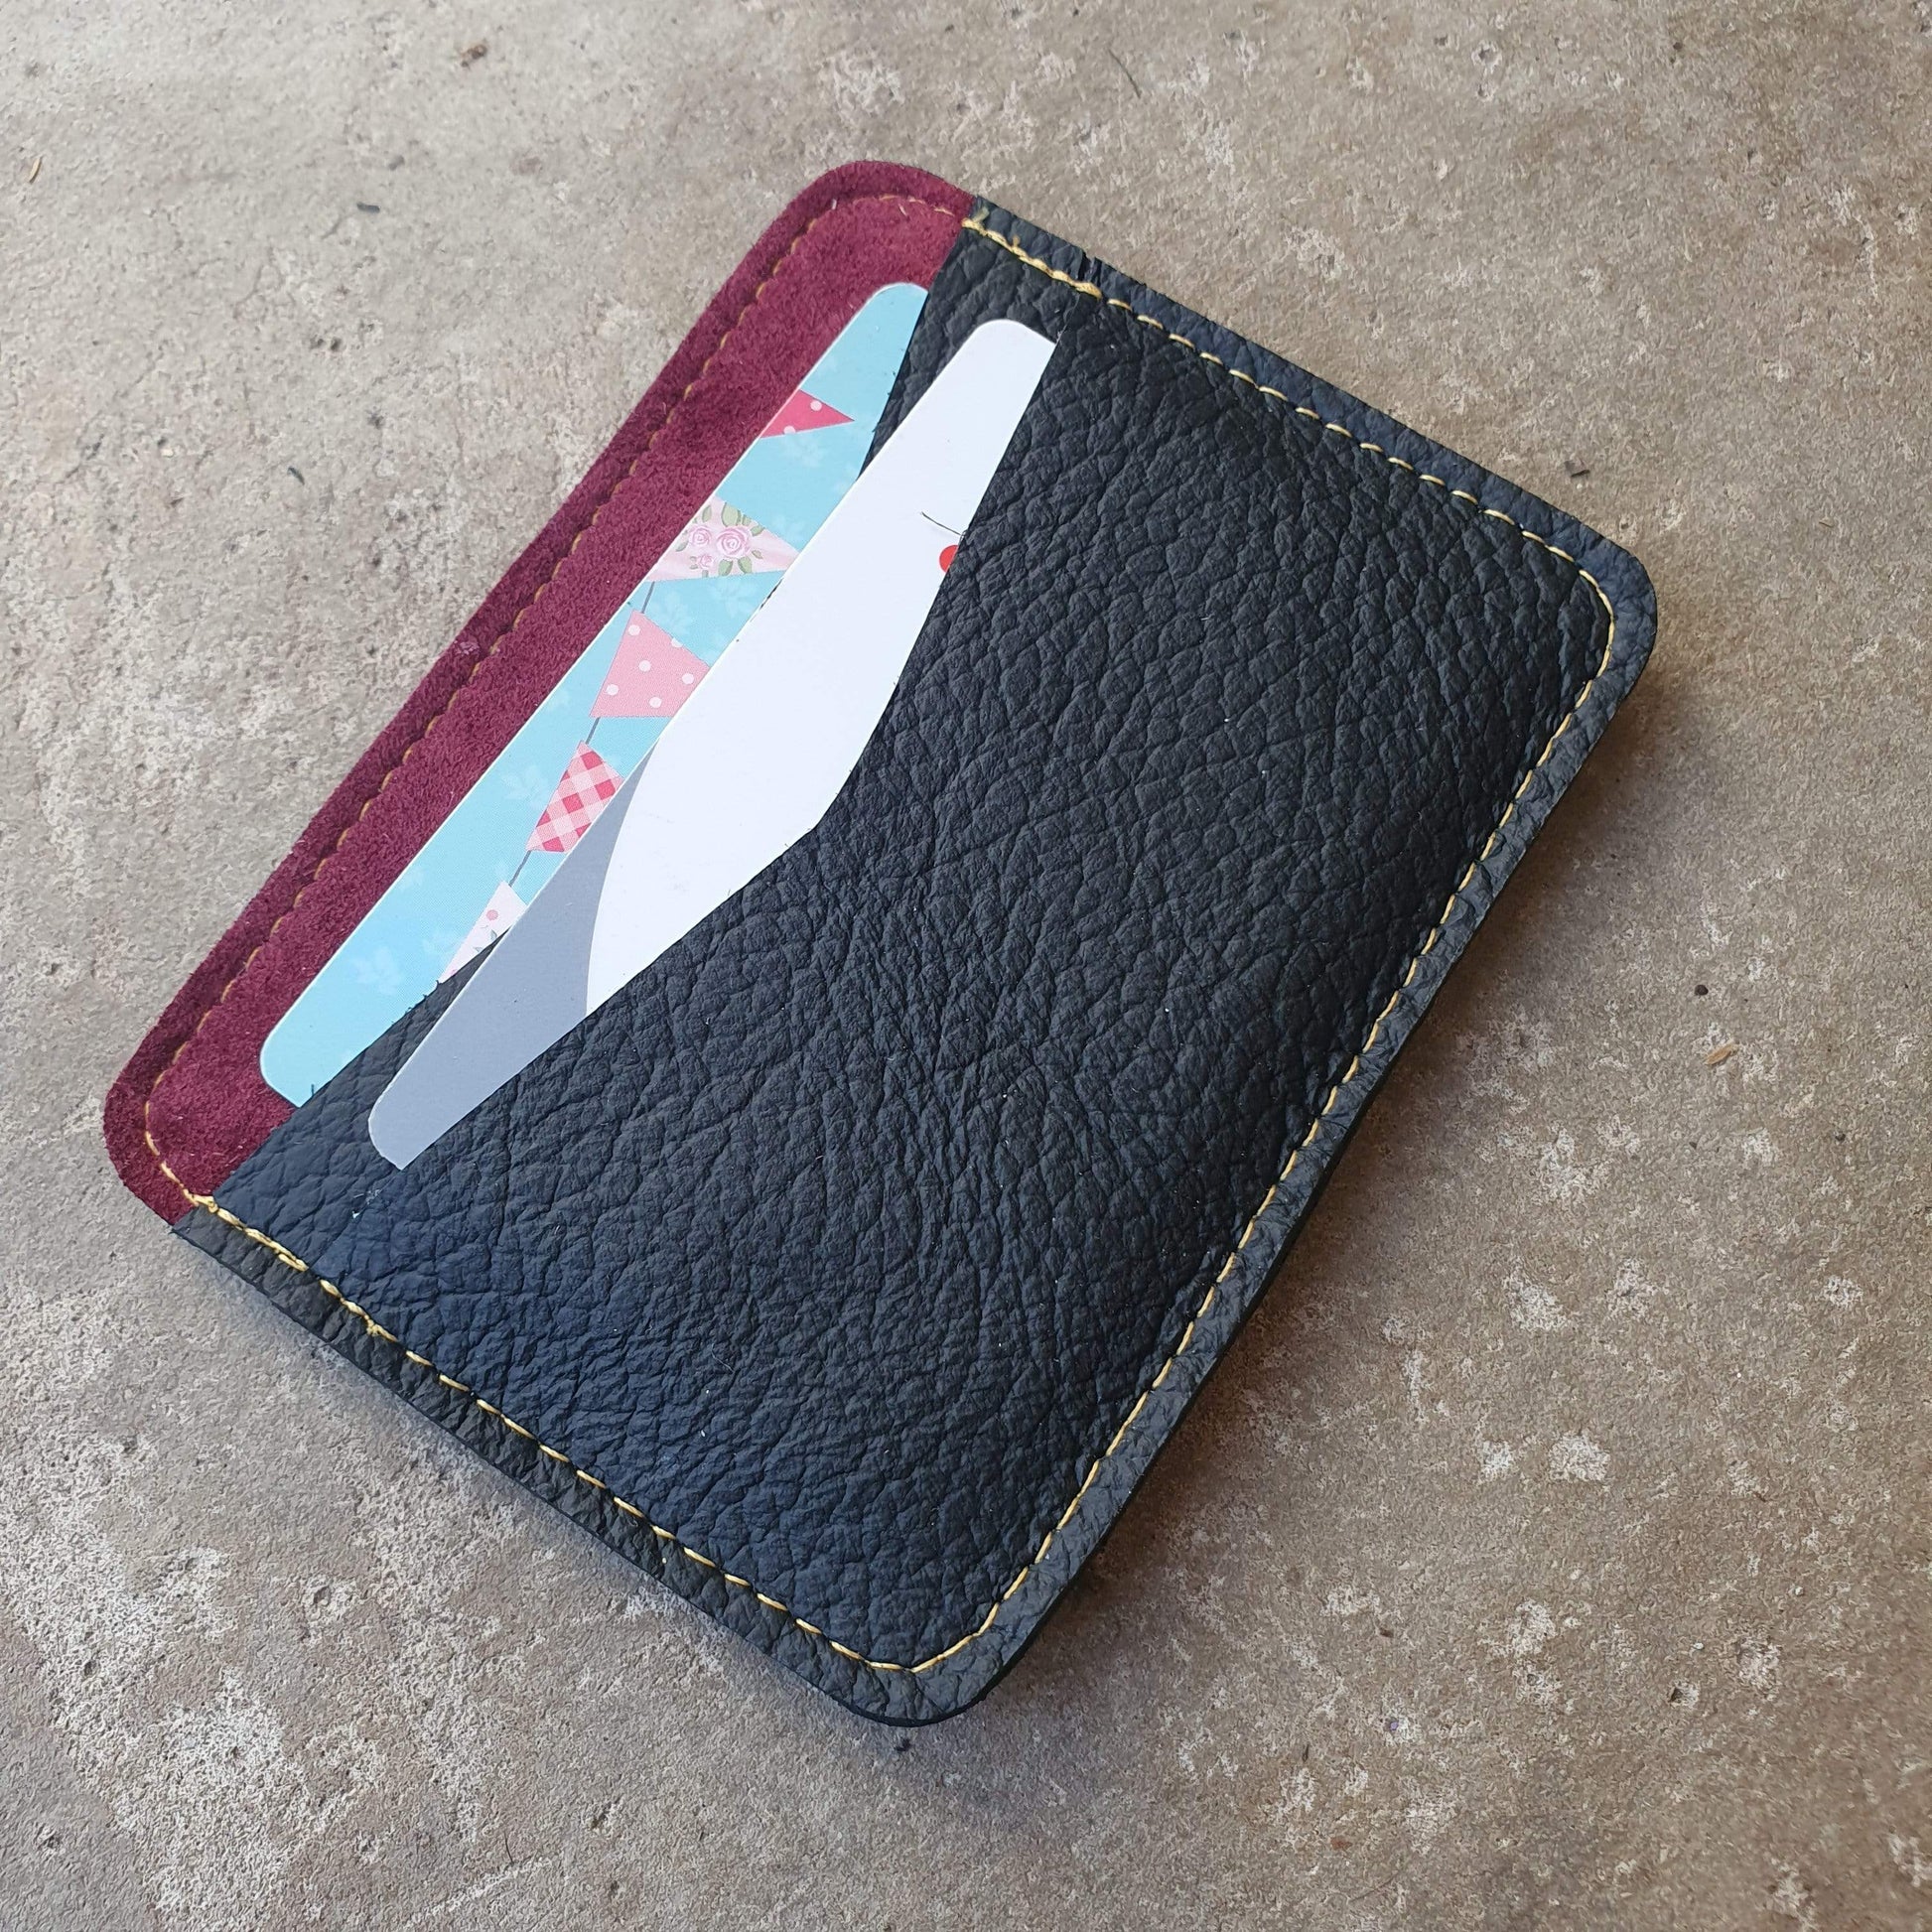 Zoe Dunn Designs Purse / Wallet Black / Wine Card Holder - Recycled Leather